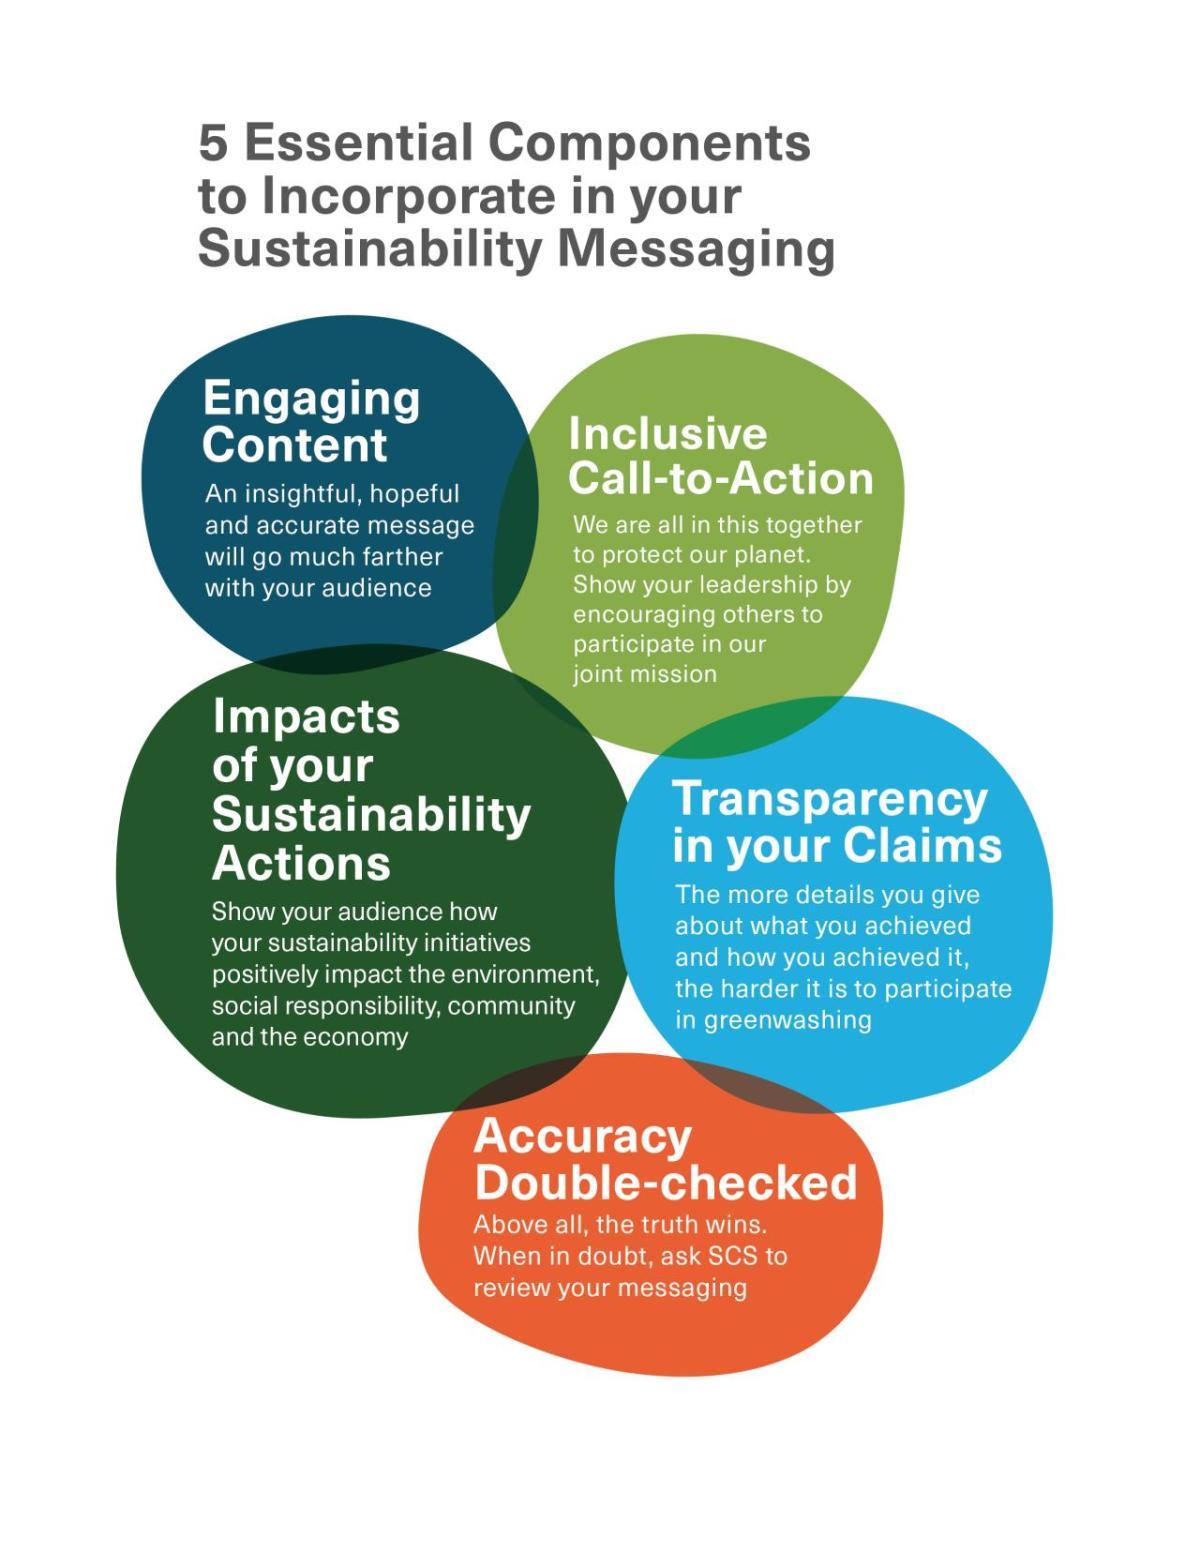 5 Essential Components in Successful Sustainability Messaging